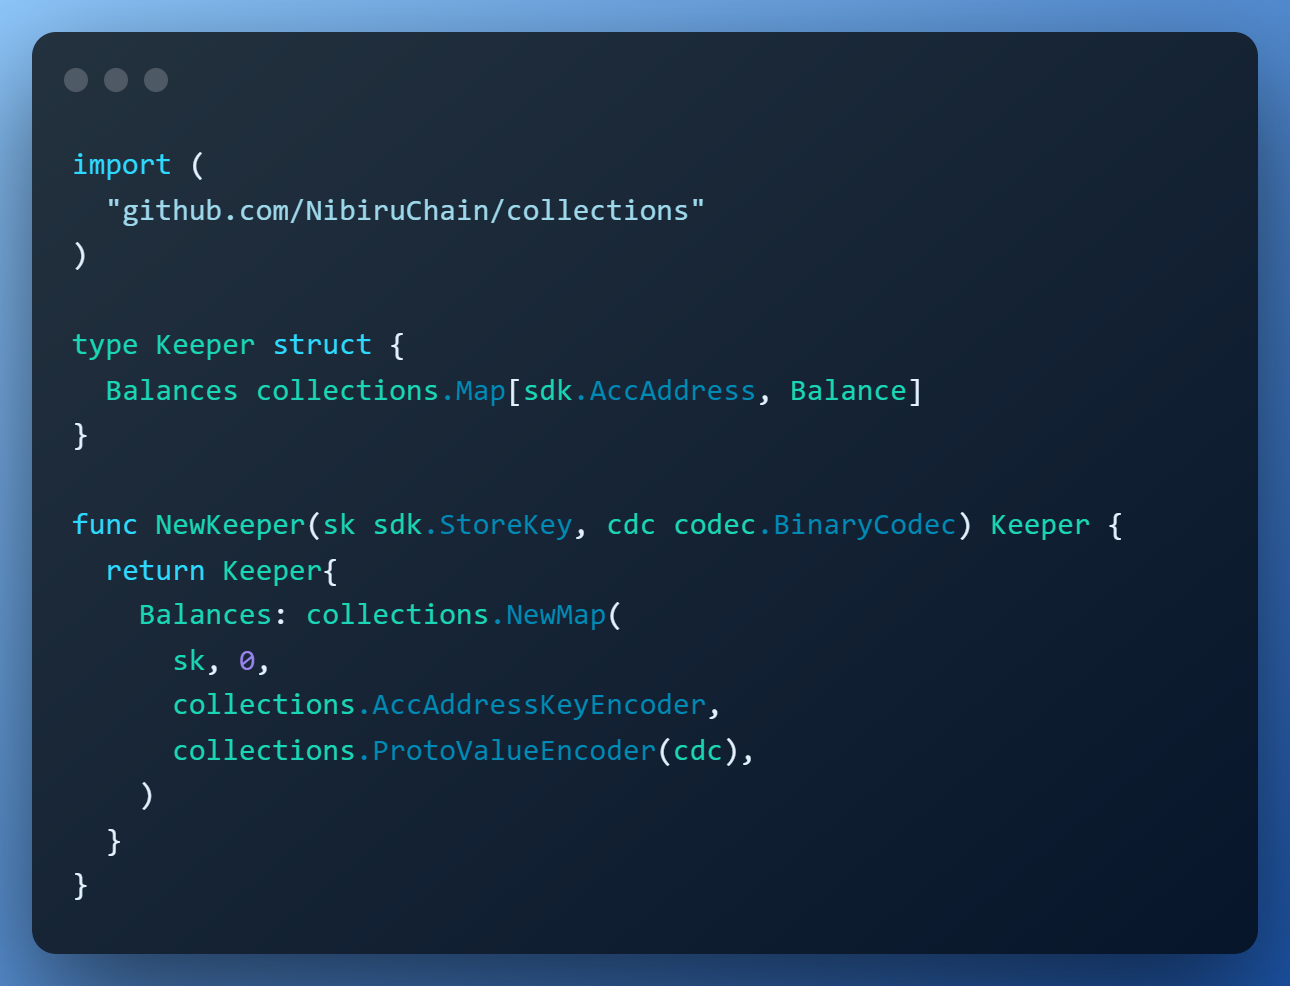 Storage types example - Collections